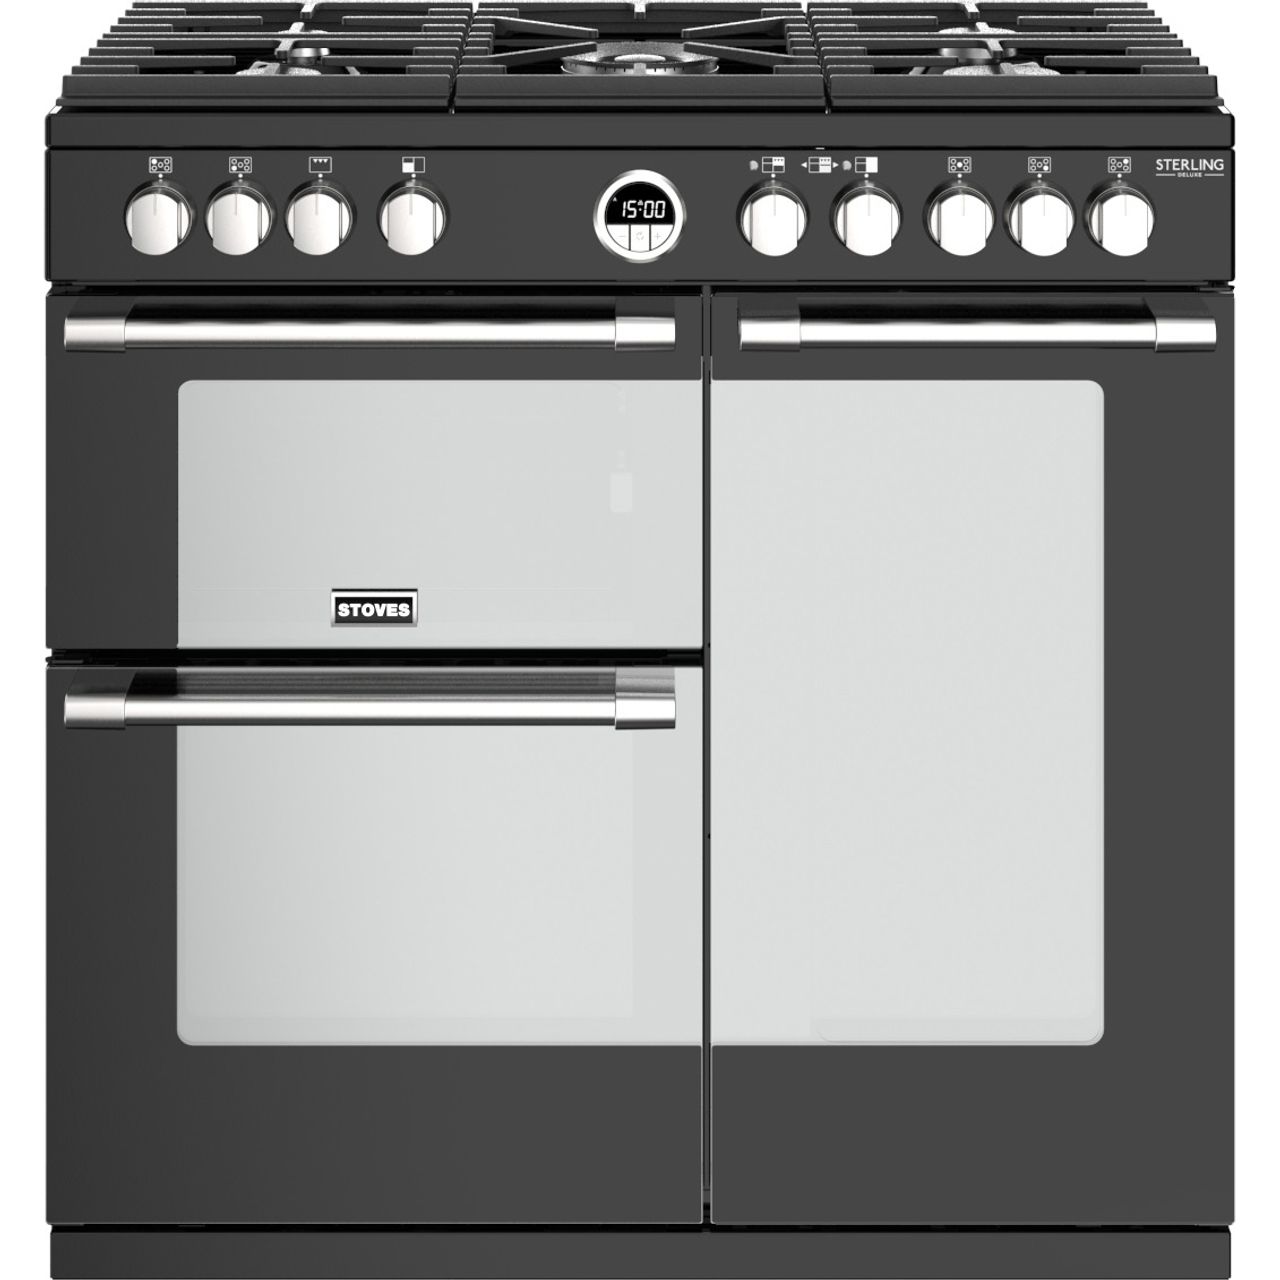 Stoves Sterling Deluxe S900G 90cm Gas Range Cooker Review